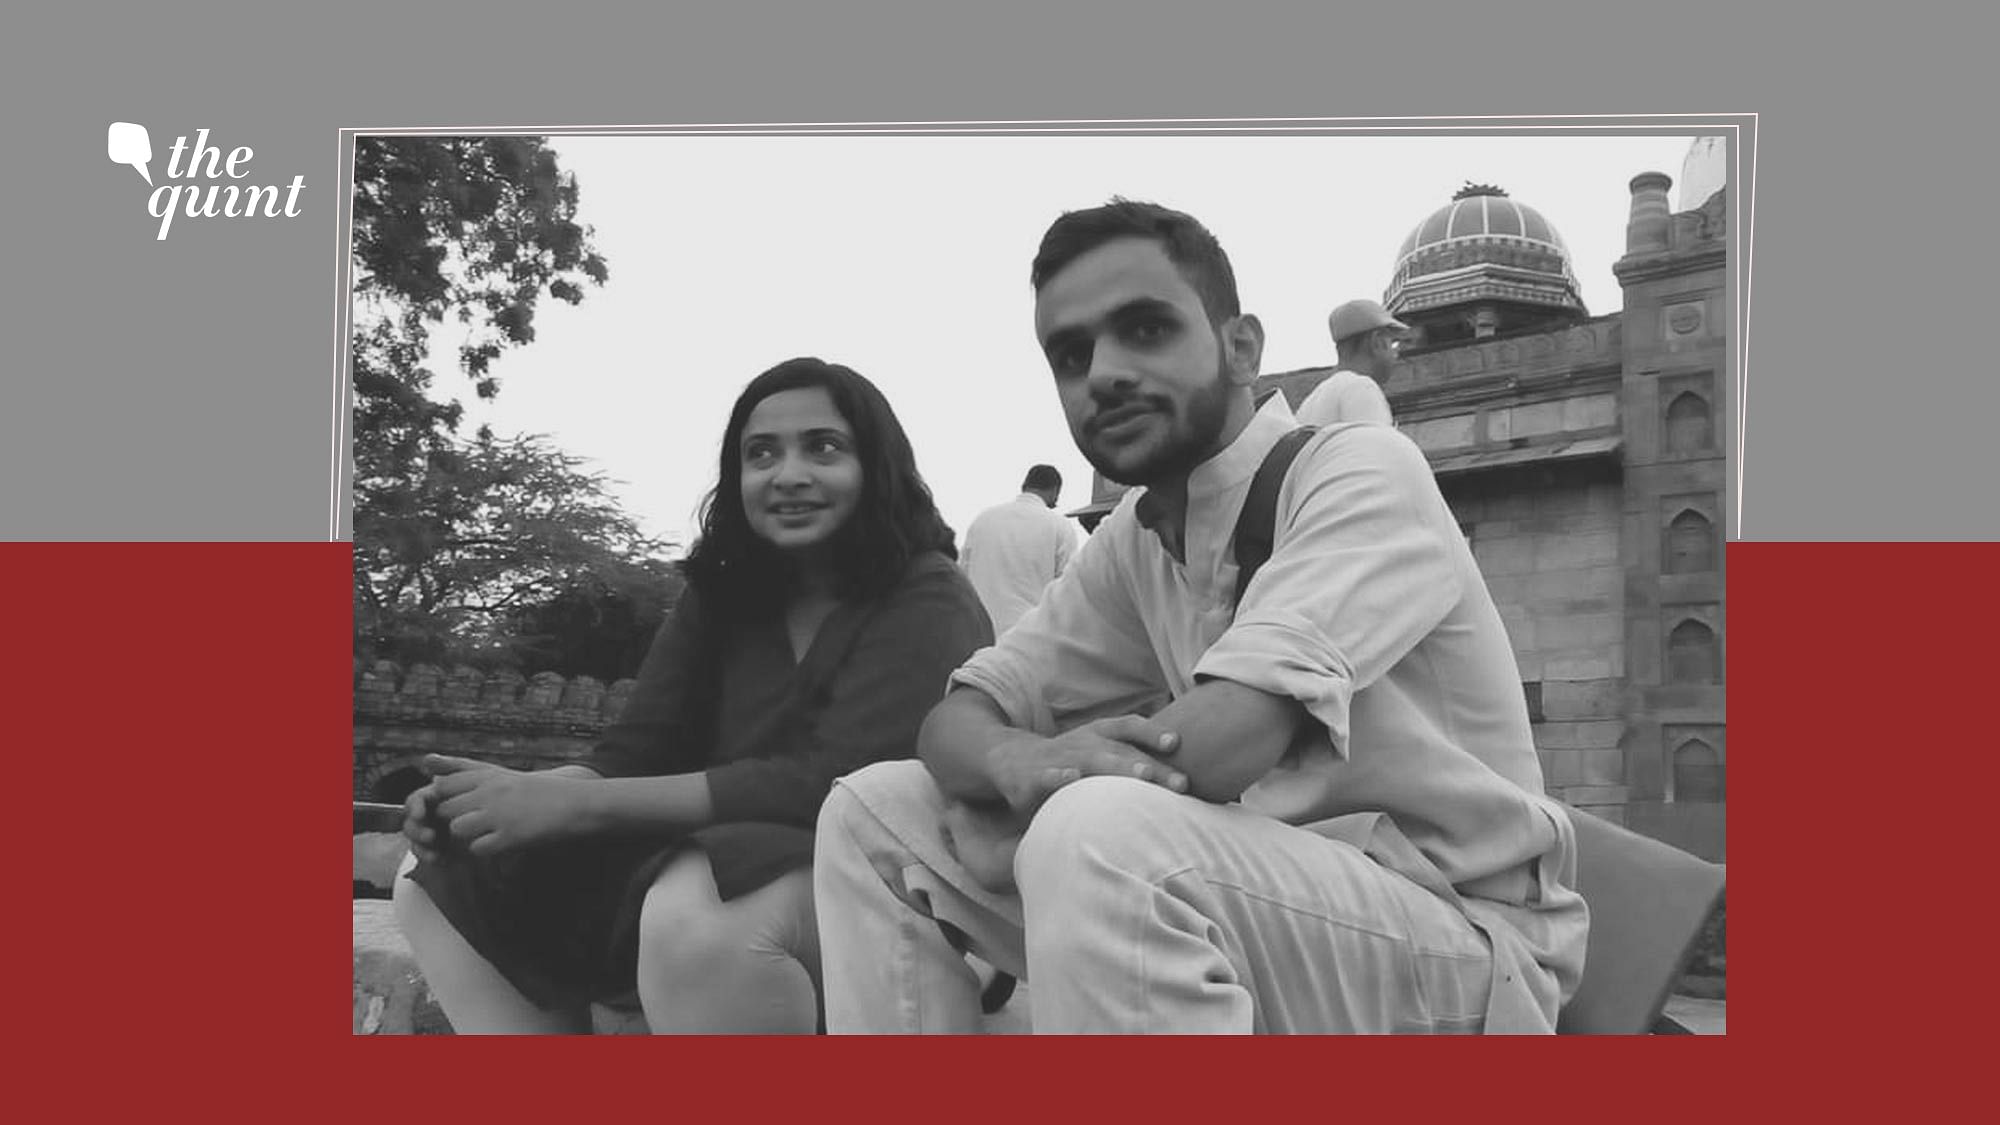 “Being close to Umar Khalid, along with a few others, his blisters are mine. We share the pain, the intermittent respites, and get thrown back to the pain again just when we were getting comfortably numb,” his friend Banojyotsana Lahiri said.